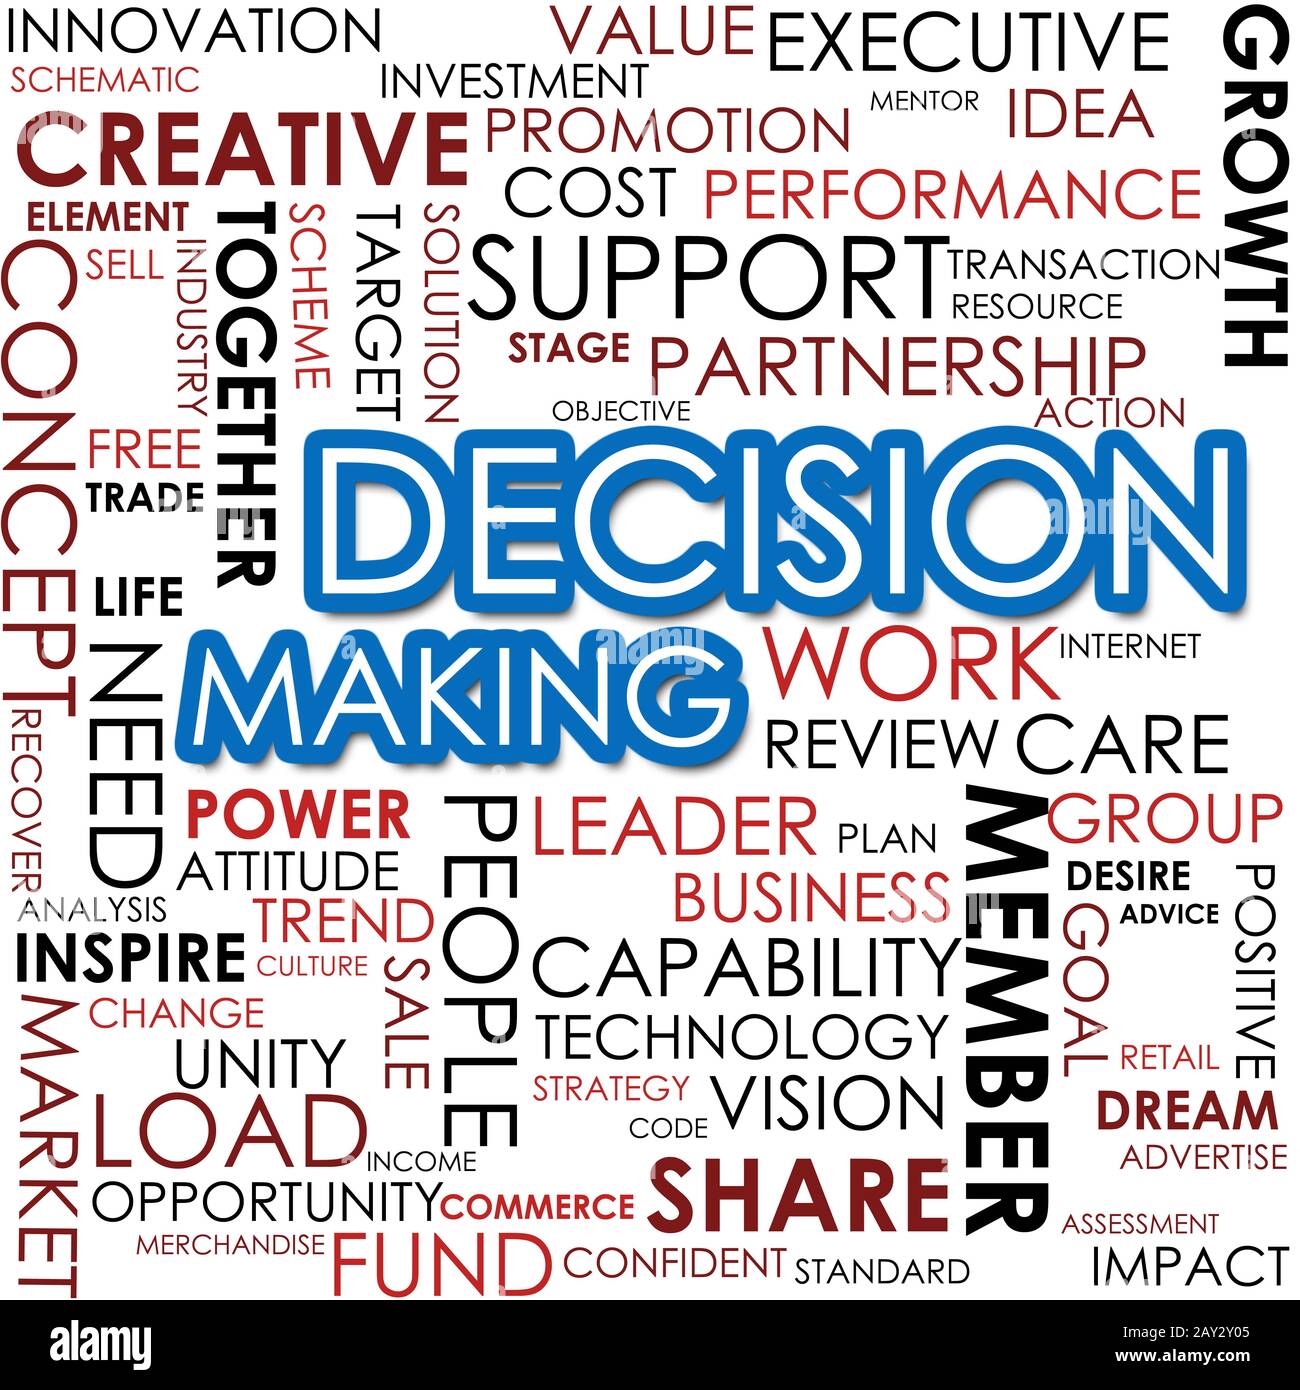 Decision making word cloud Stock Photo